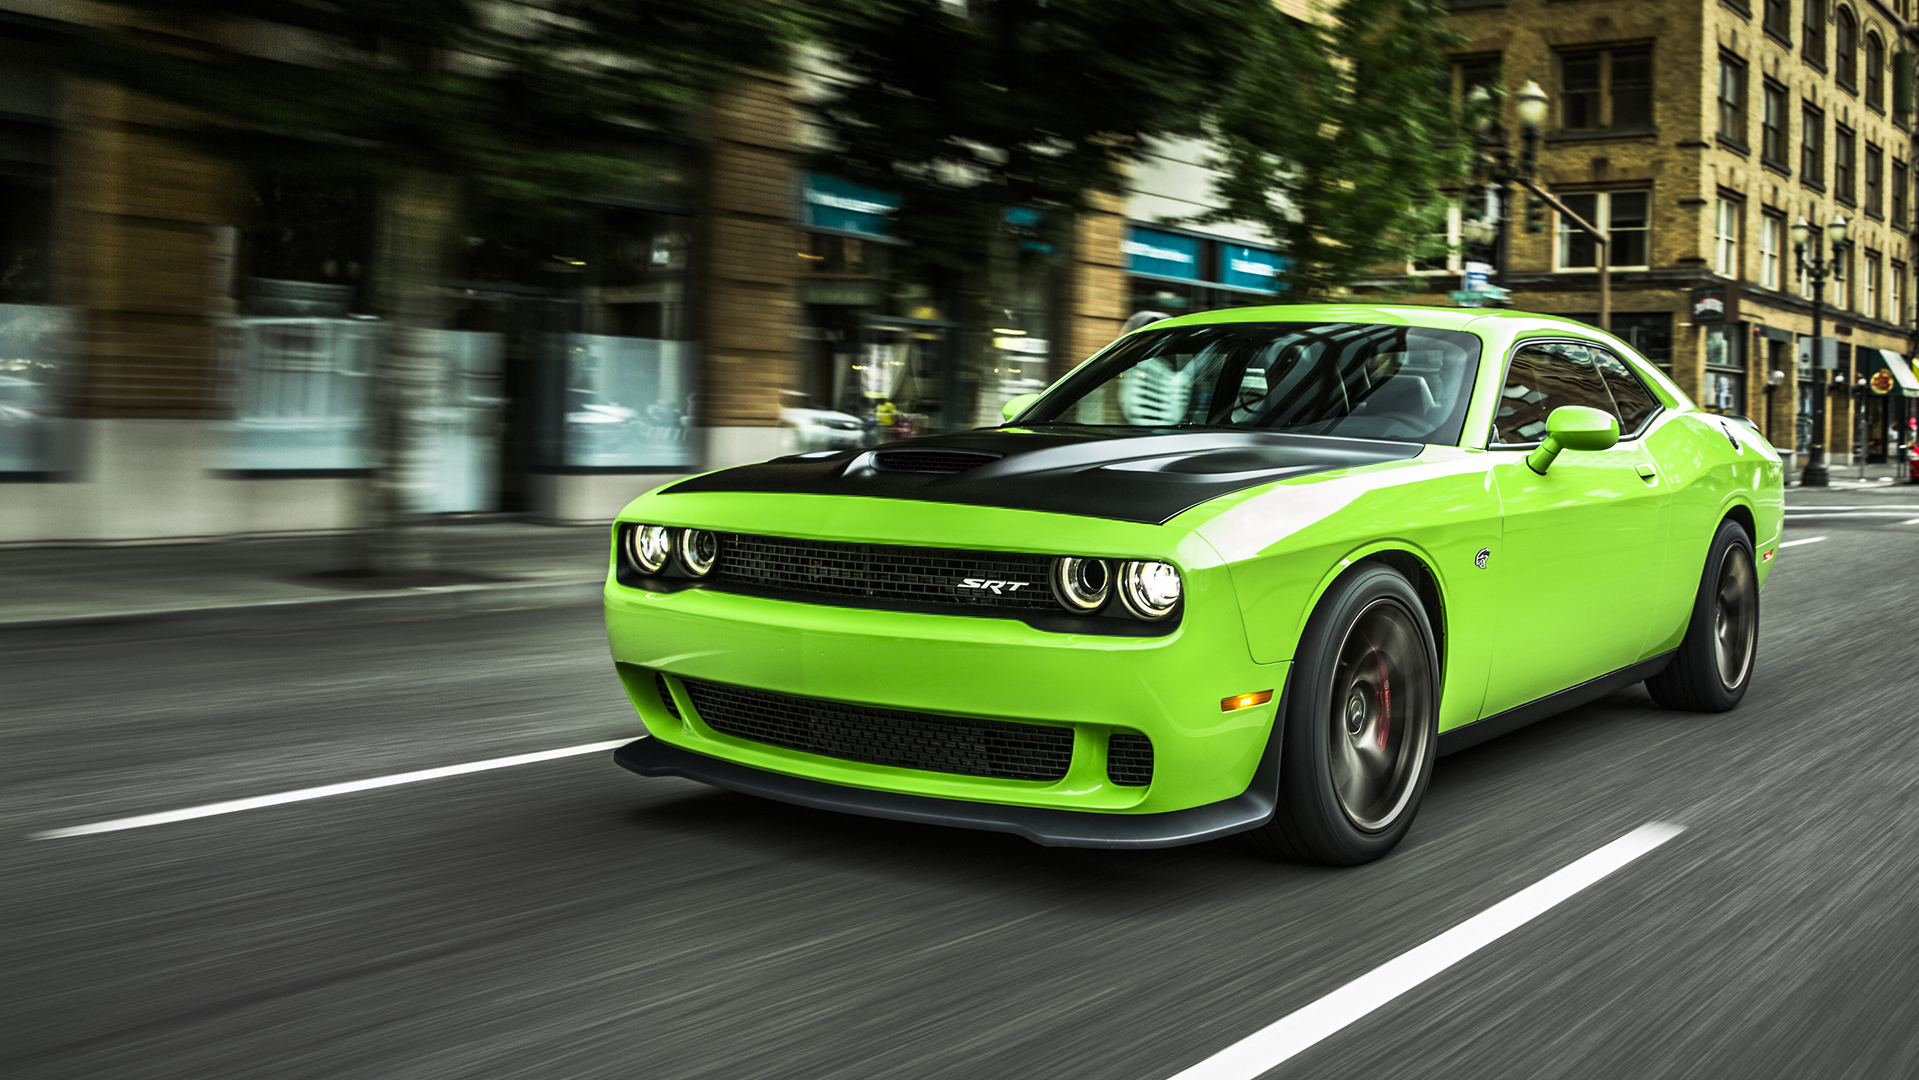 neon yellow Dodge Challenger SRT Hellcat front angular view in the motion